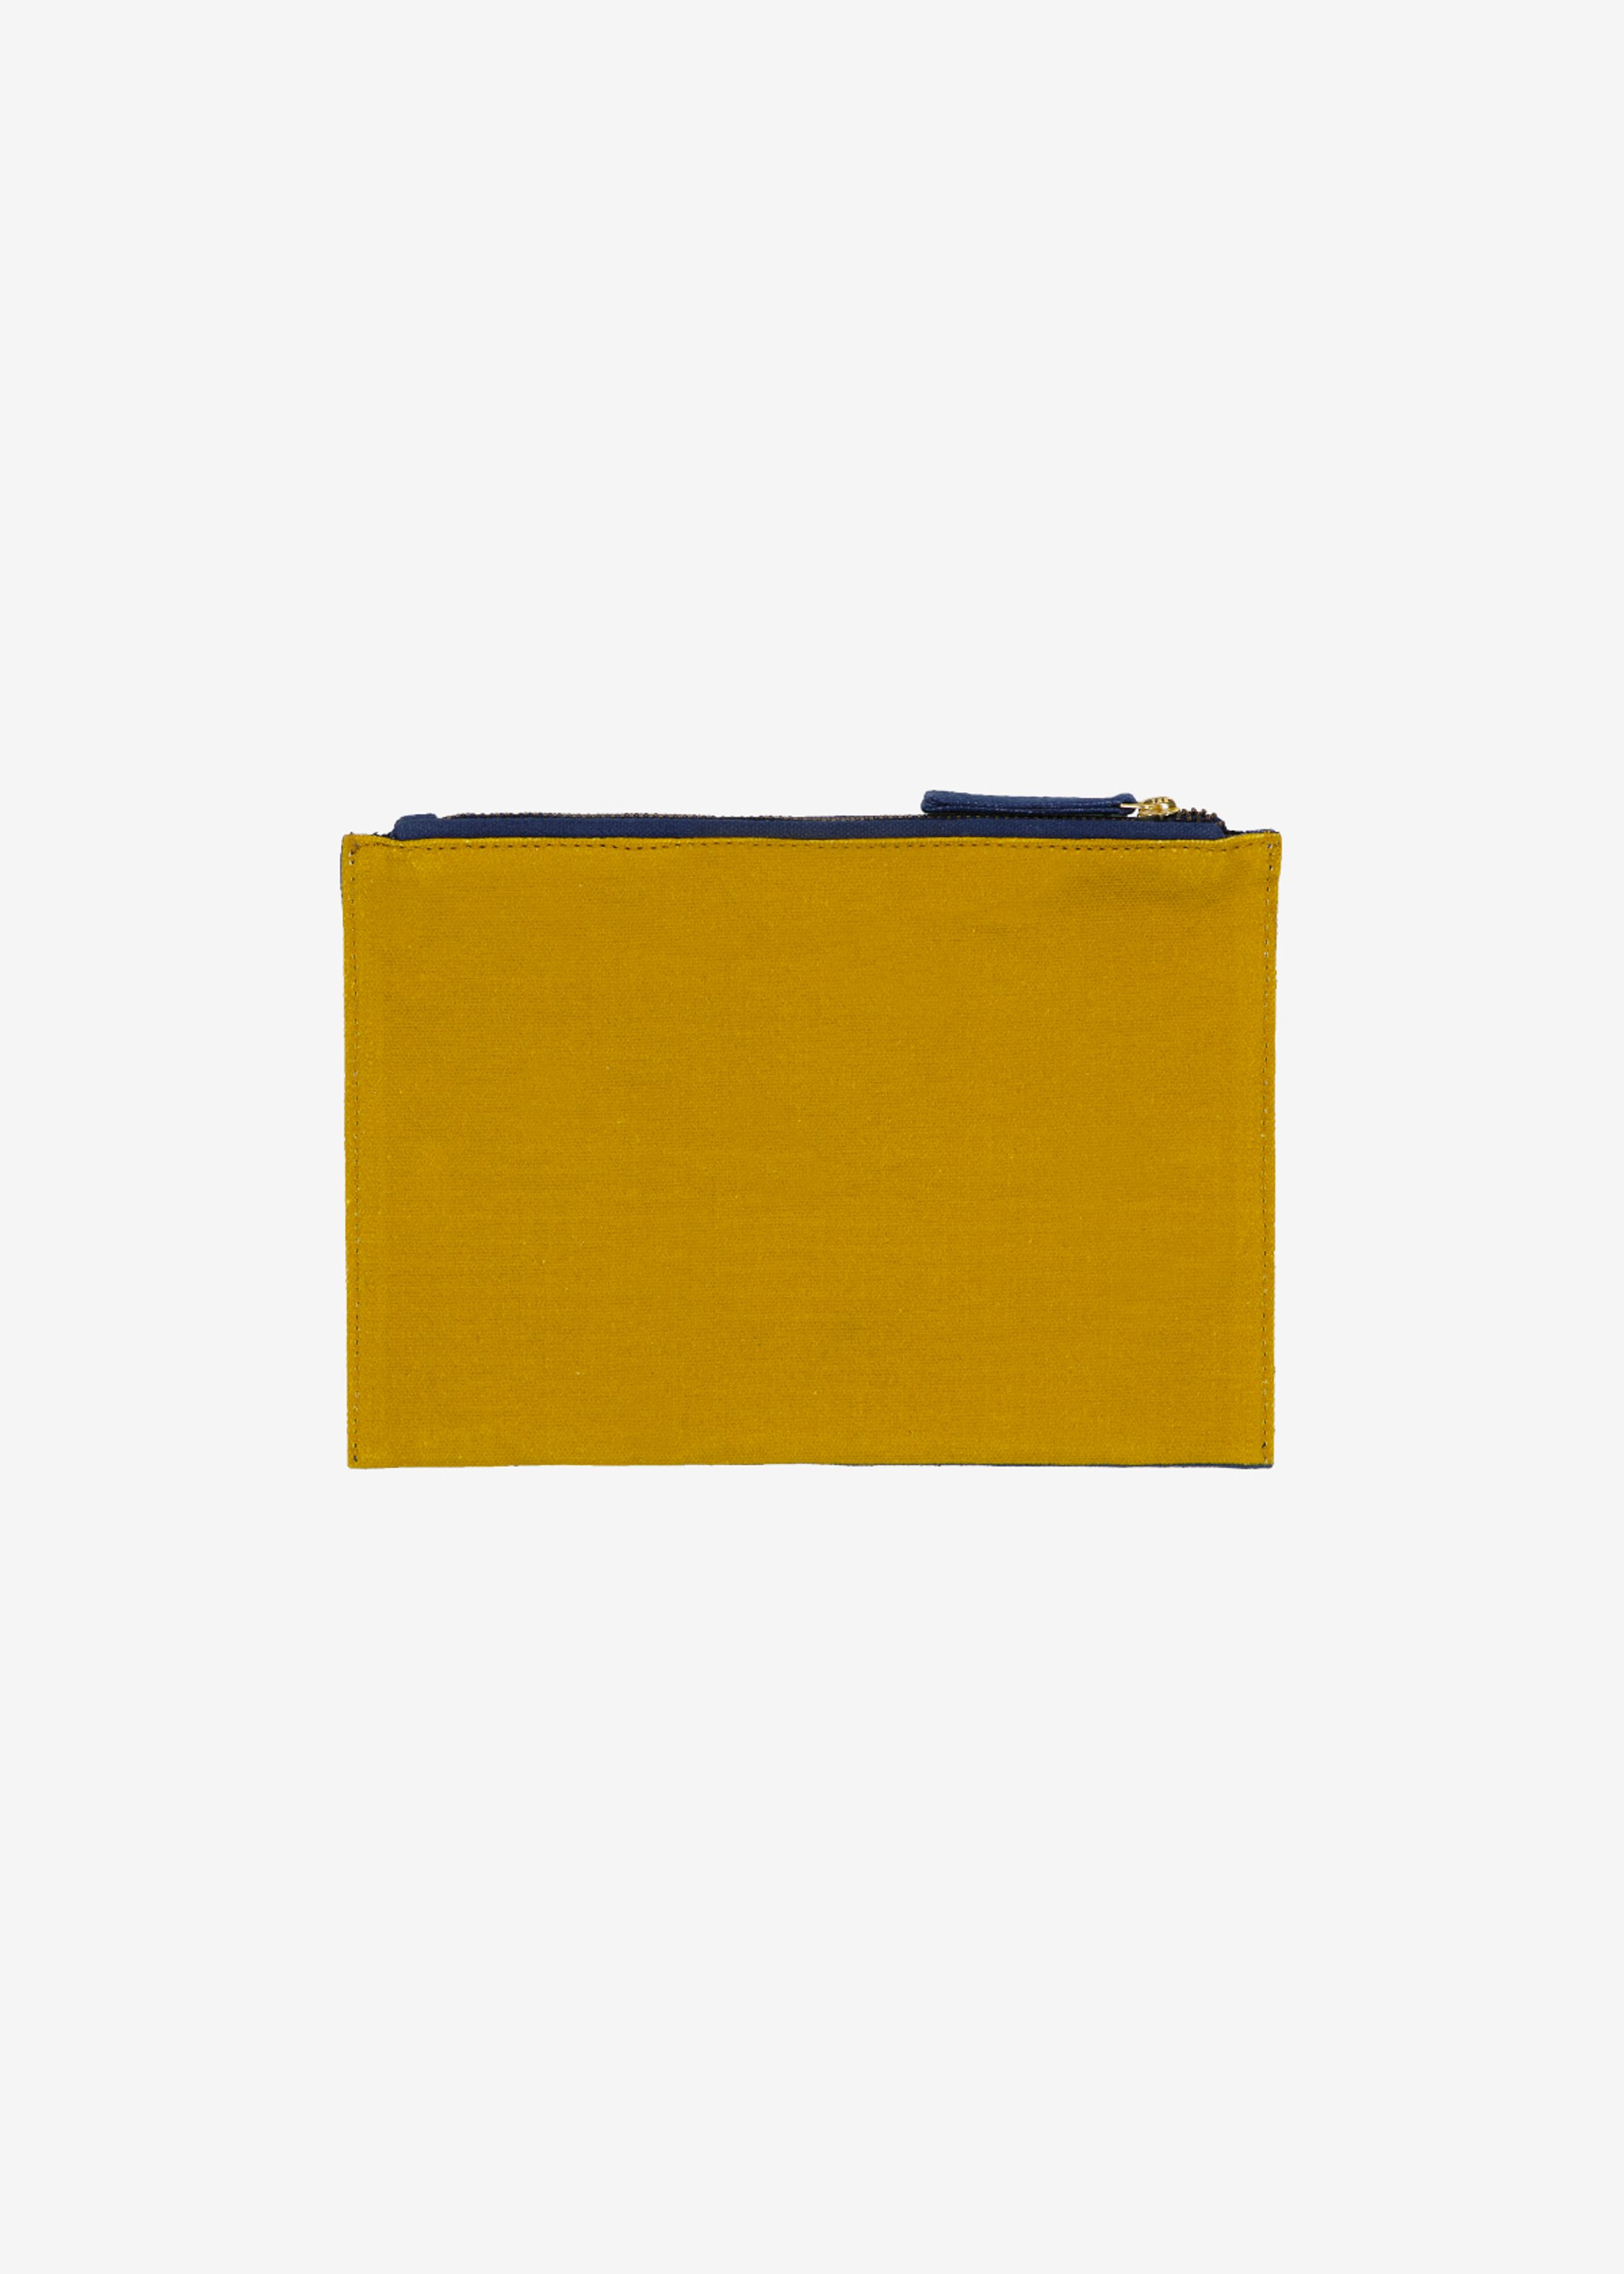 Embroidered Pouch - Central Park - Navy